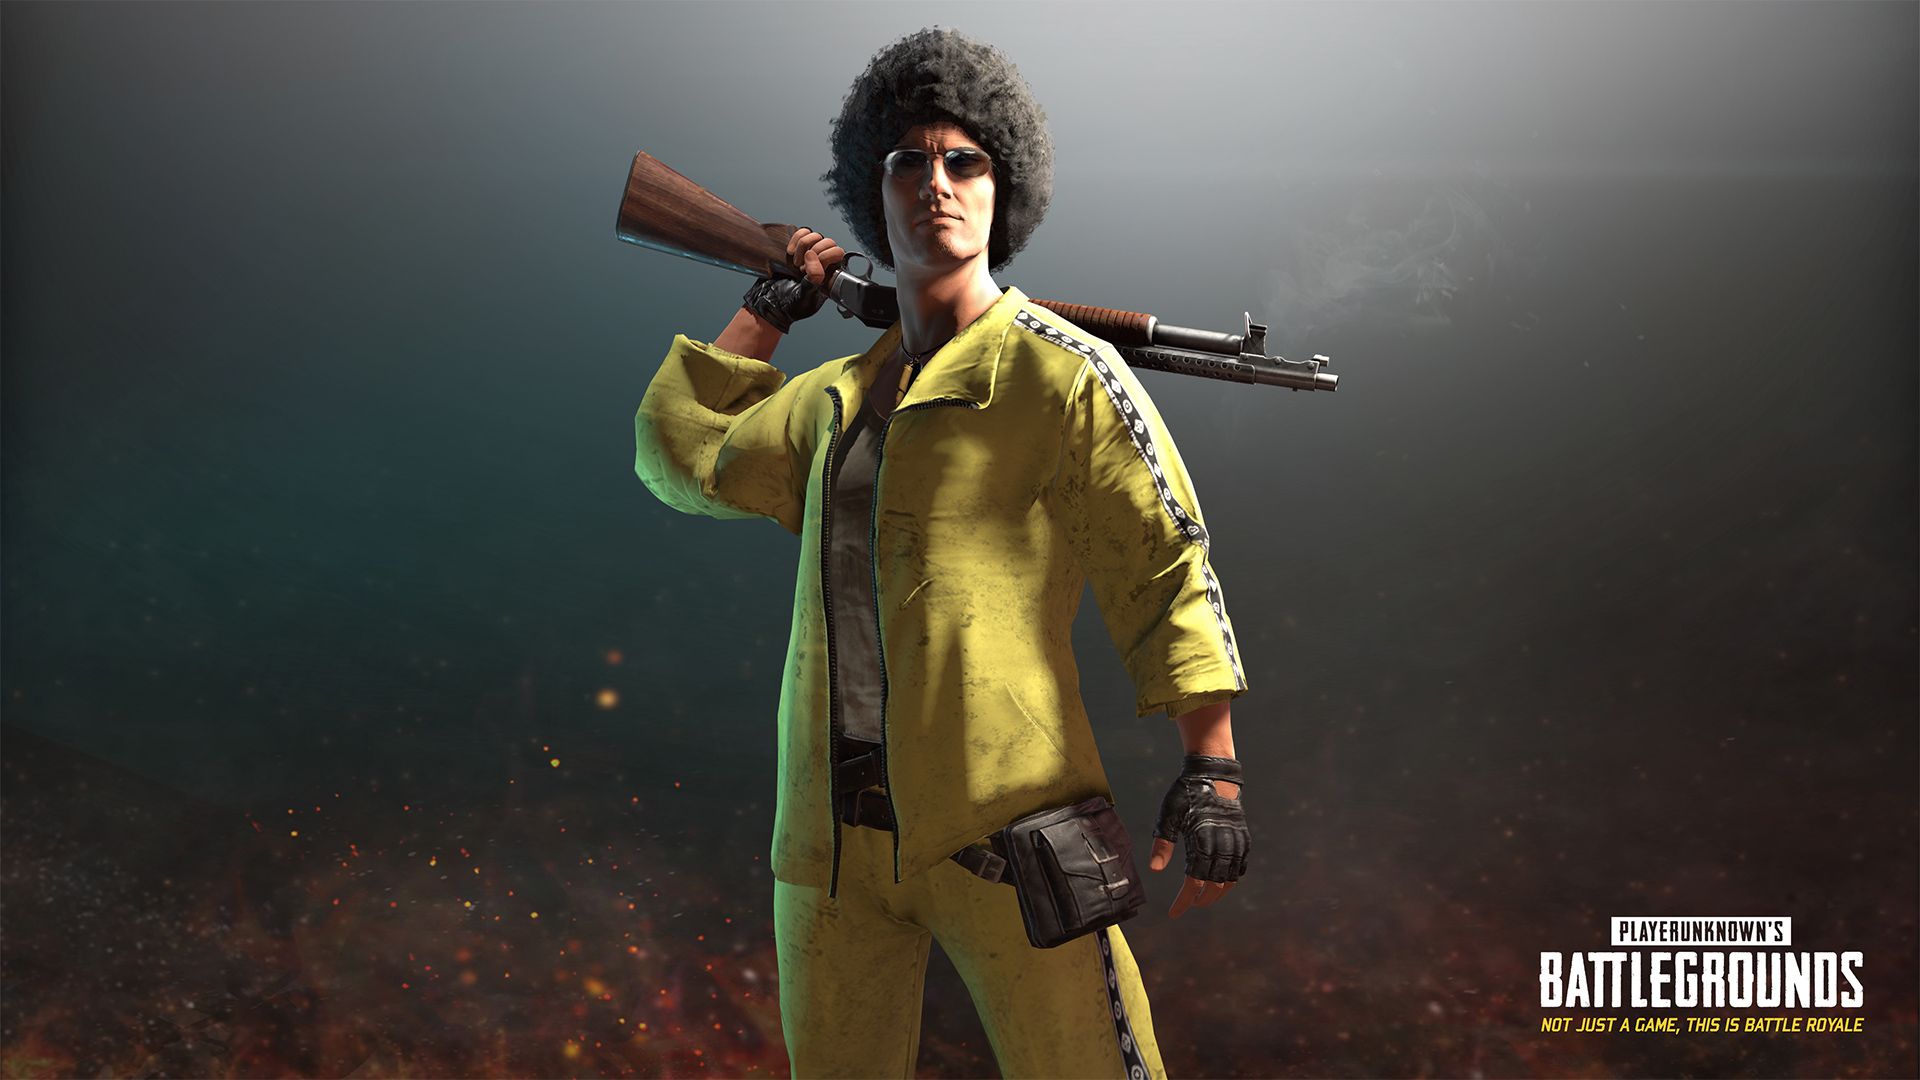 PUBG Is Getting Some Sweet Battle Royale Inspired Skins